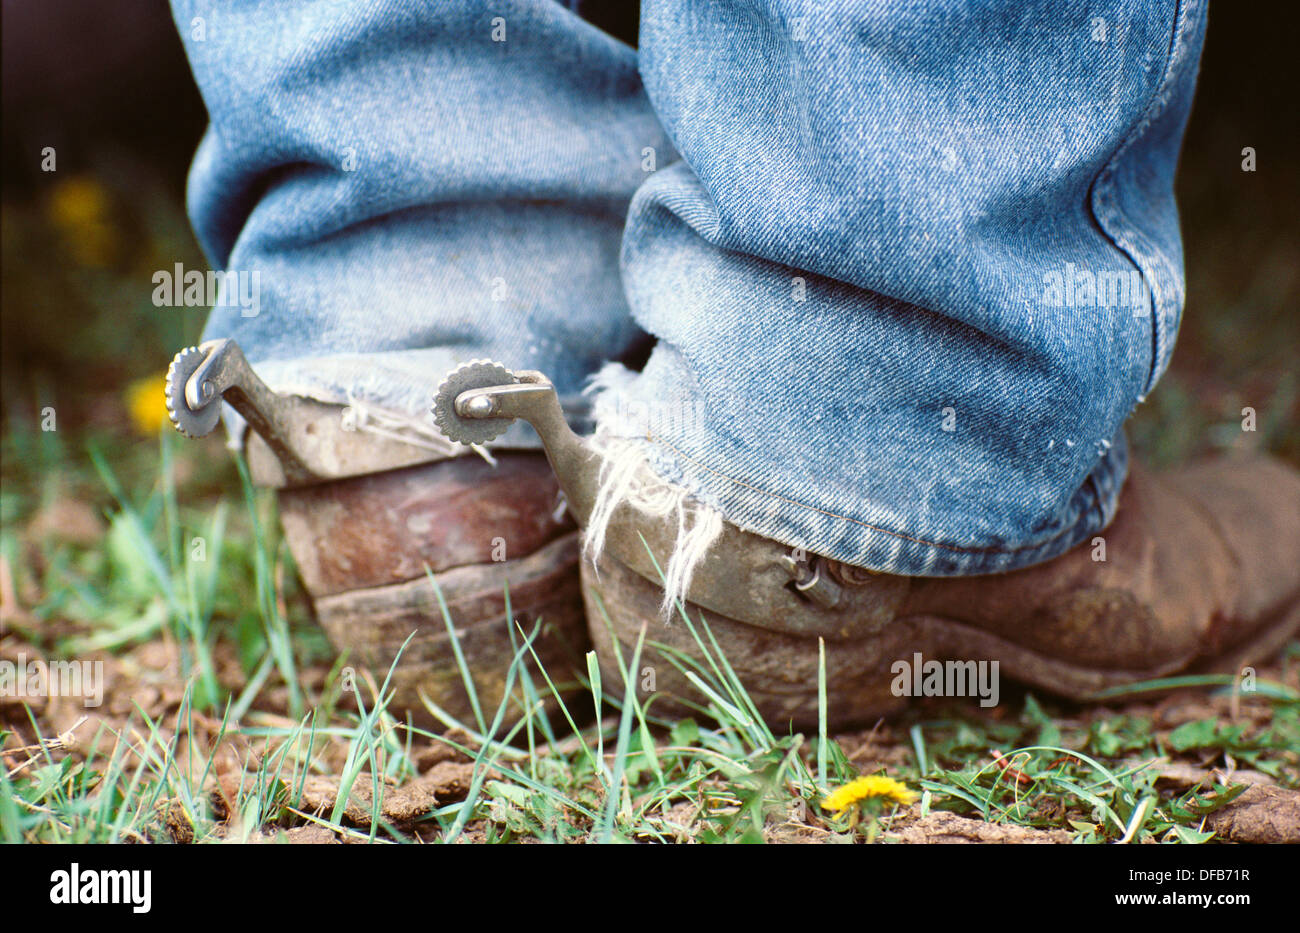 Boots And Spurs Stock Photos & Boots And Spurs Stock Images - Alamy